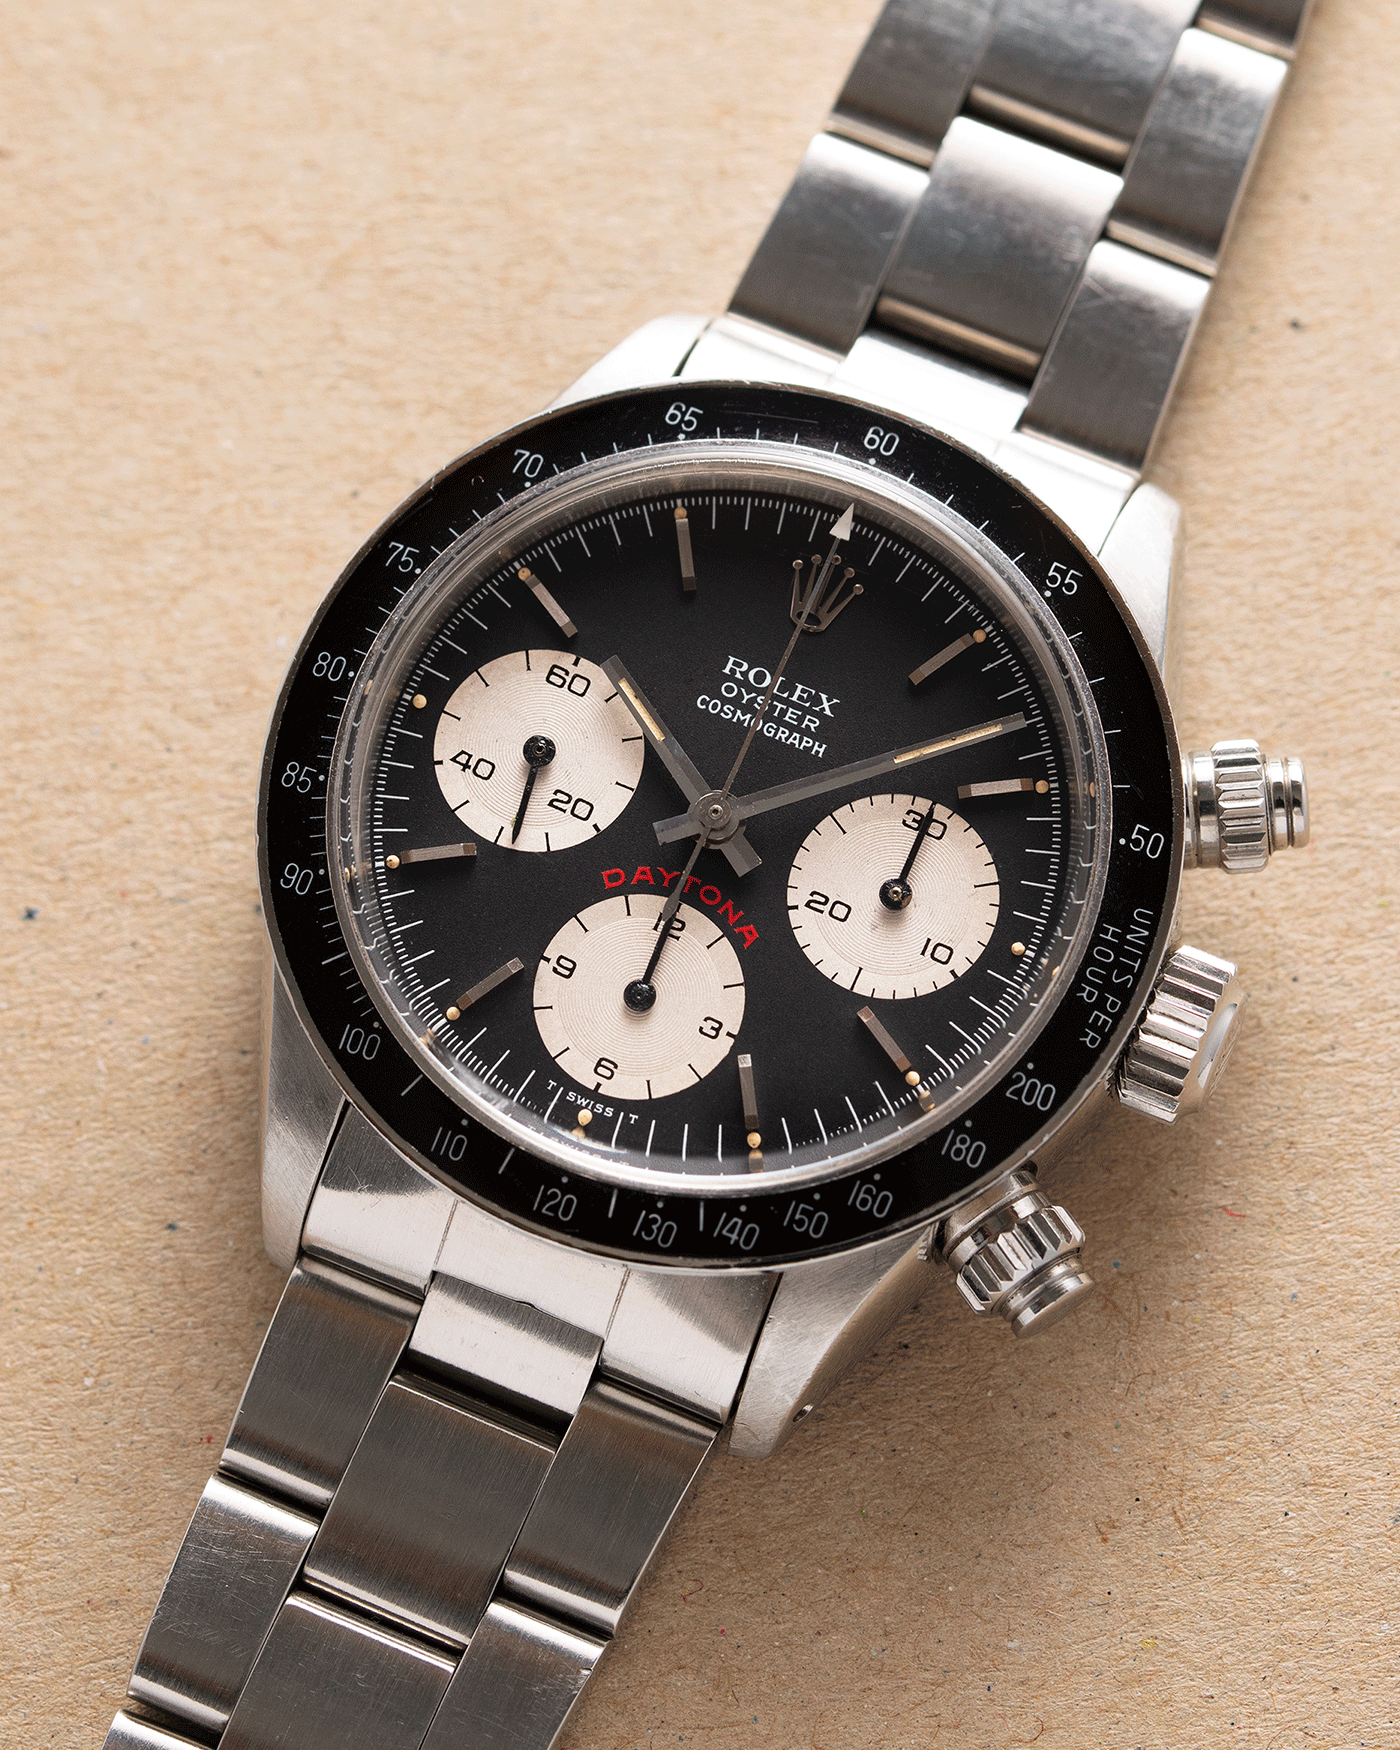 Brand: Rolex Year: 1985 Model: Cosmograph Daytona Reference Number: 6263 Serial Number: 8,7XXX,XXX Material: Stainless Steel Movement: Valjoux 727 Case Diameter: 36mm Strap: Rolex 78350 Oyster Bracelet with 571 Endlinks